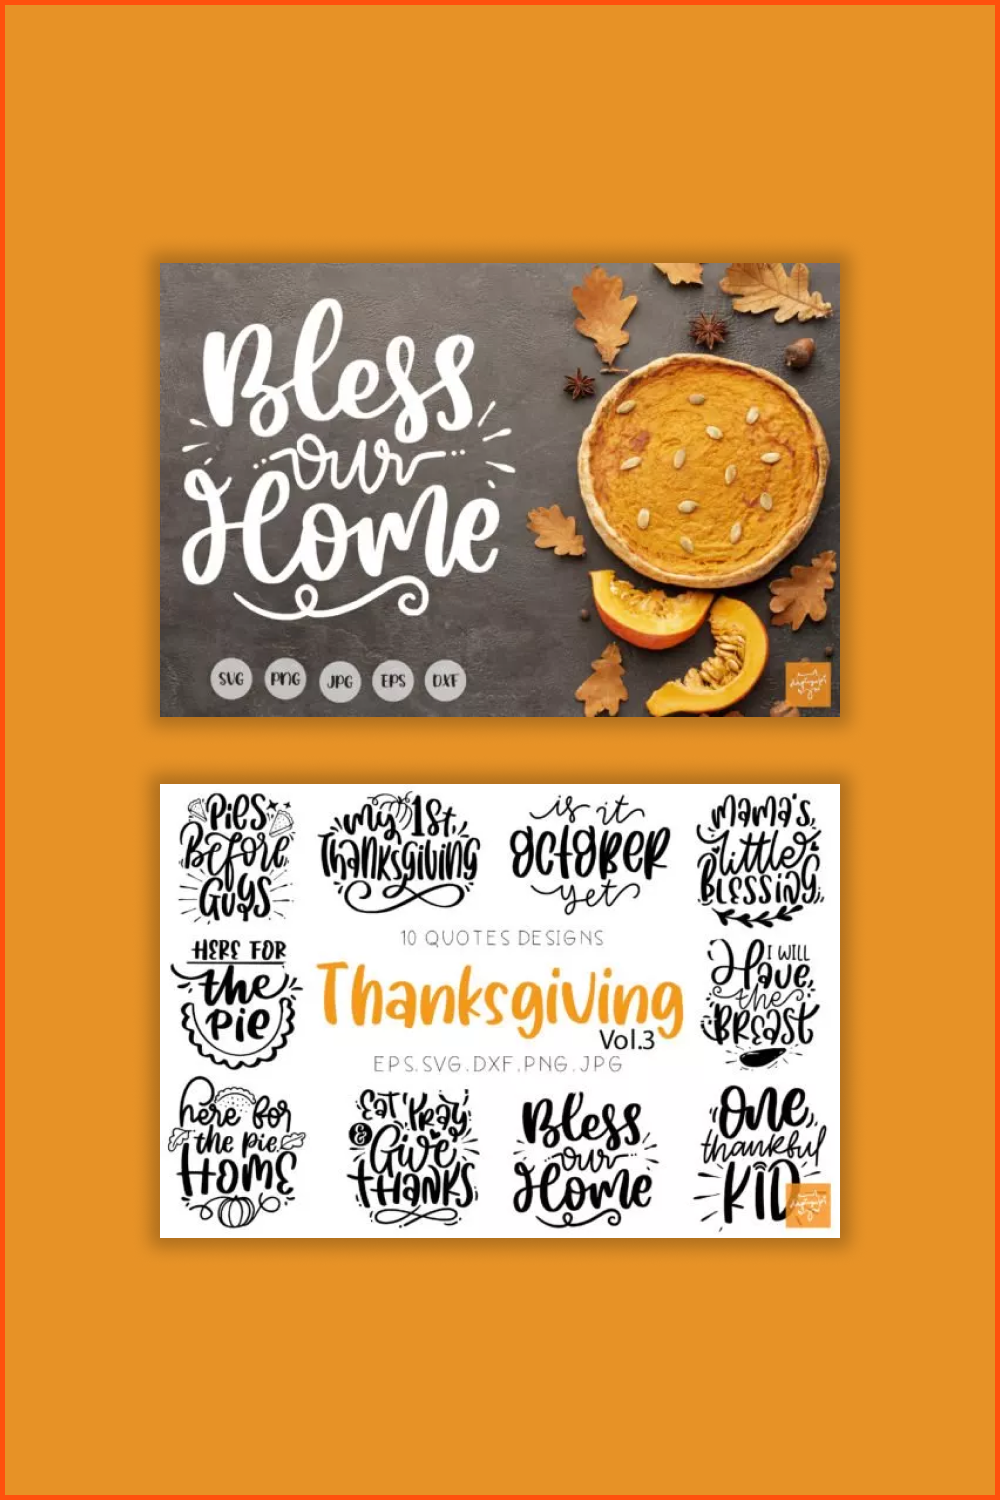 Collage of bright pictures with pumpkin pie and thanksgiving day logos.